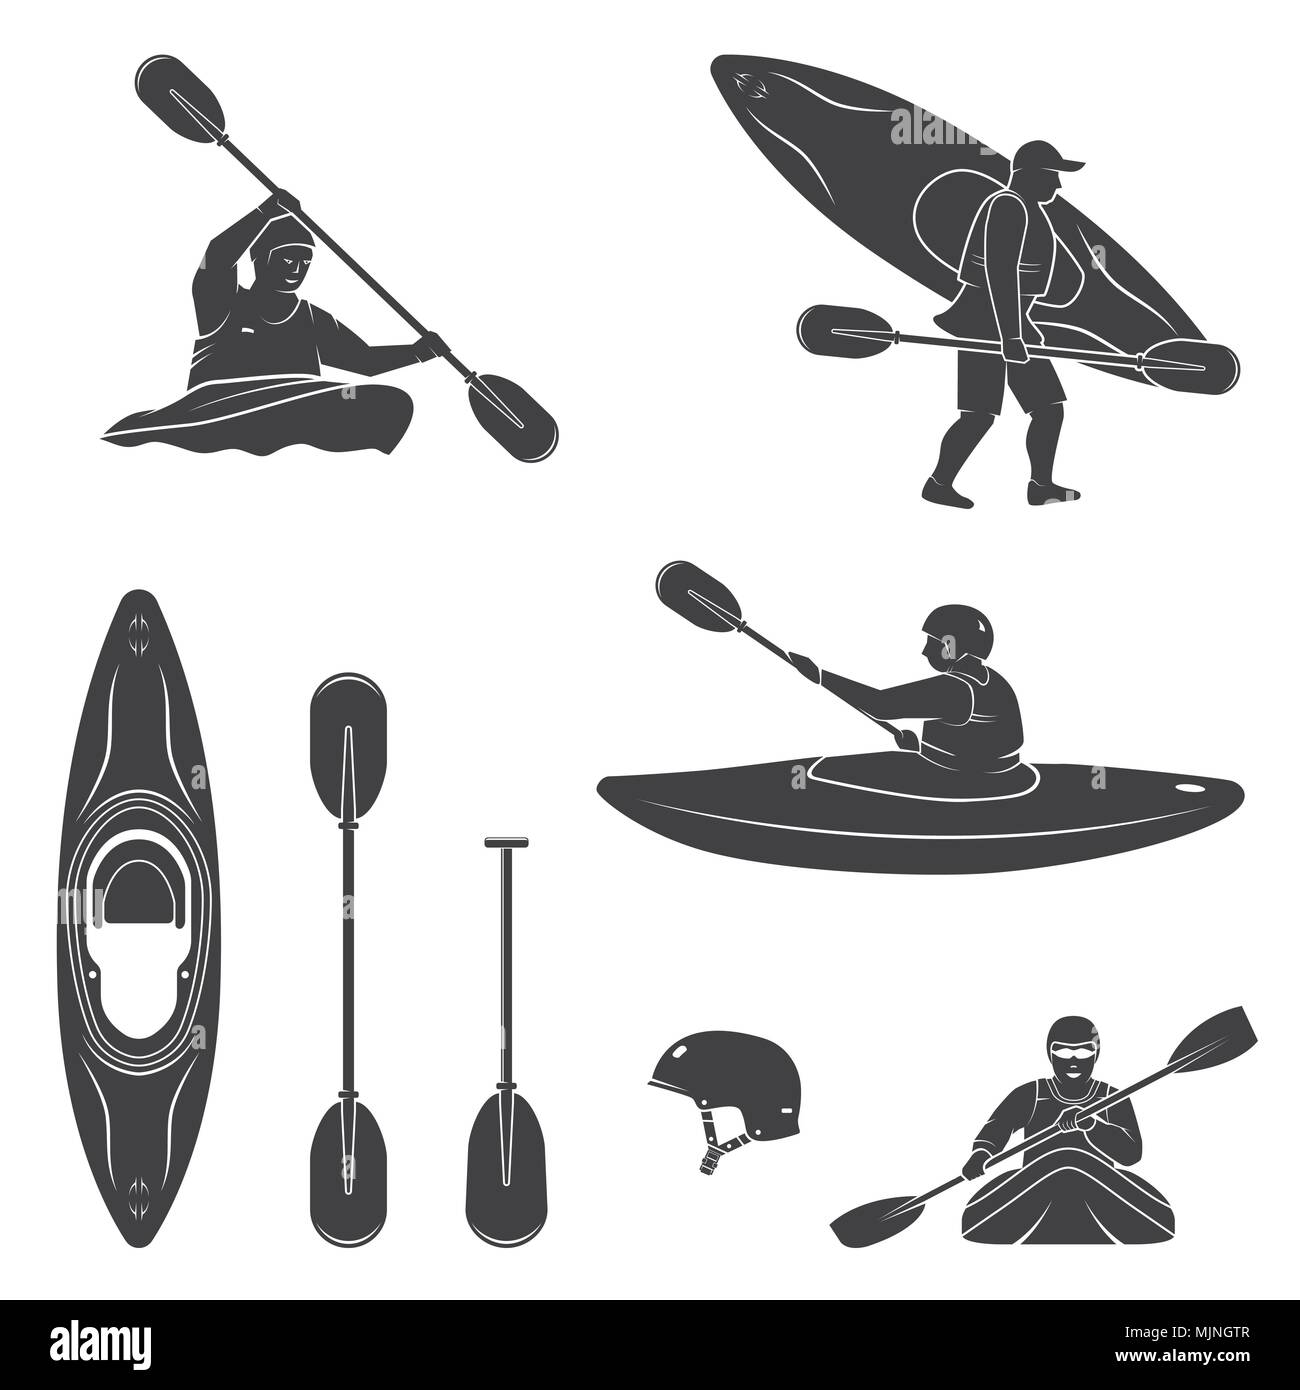 Set of extrema water sports equipment, kayaker and canoe silhouettes. Vector illustration. Collection include kayak, paddles, helmet and kayaker silho Stock Vector